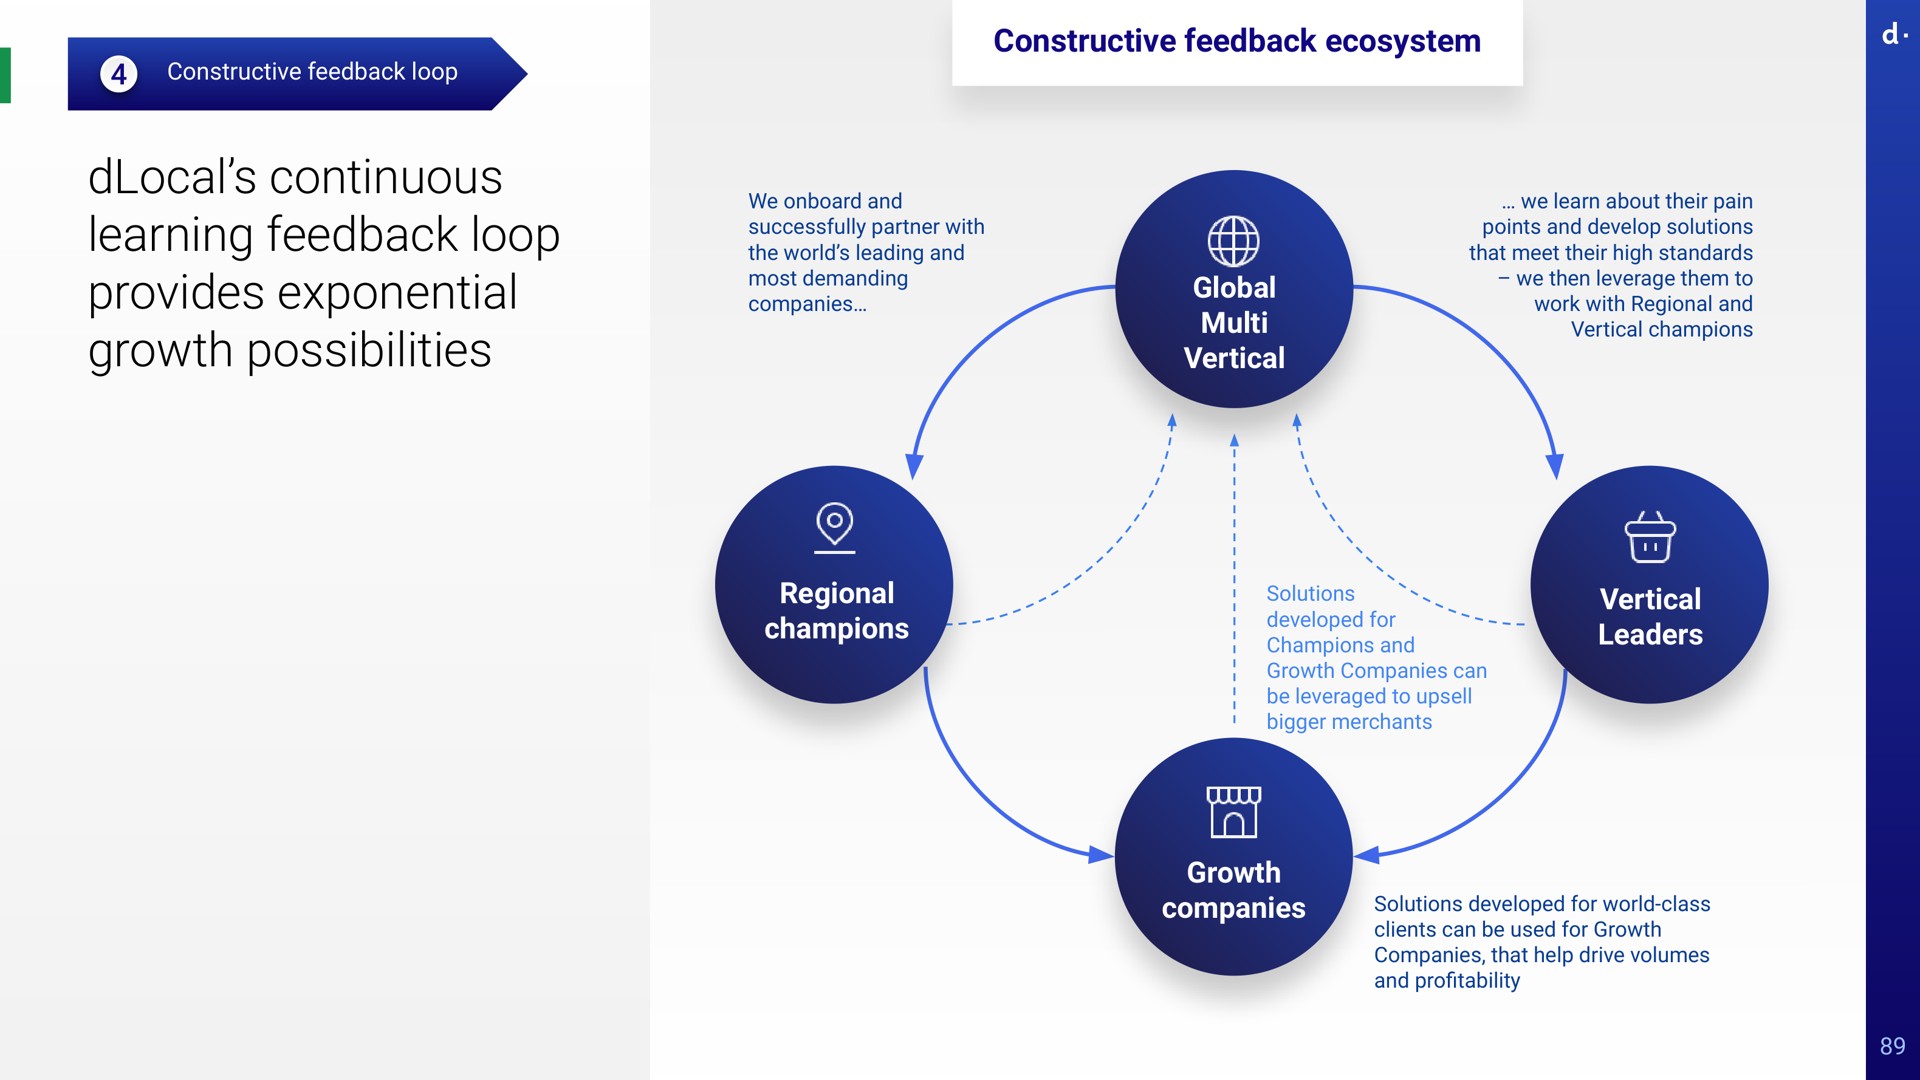 constructive feedback loop continuous learning feedback loop provides exponential growth possibilities constructive feedback ecosystem we and successfully partner with the world leading and most demanding companies we learn about their pain points and develop solutions that meet their high standards we then leverage them to work with regional and vertical champions global vertical regional champions solutions developed for champions and growth companies can be leveraged to bigger merchants vertical leaders growth companies solutions developed for world class clients can be used for growth companies that help drive volumes and pro i a profitability | dLocal